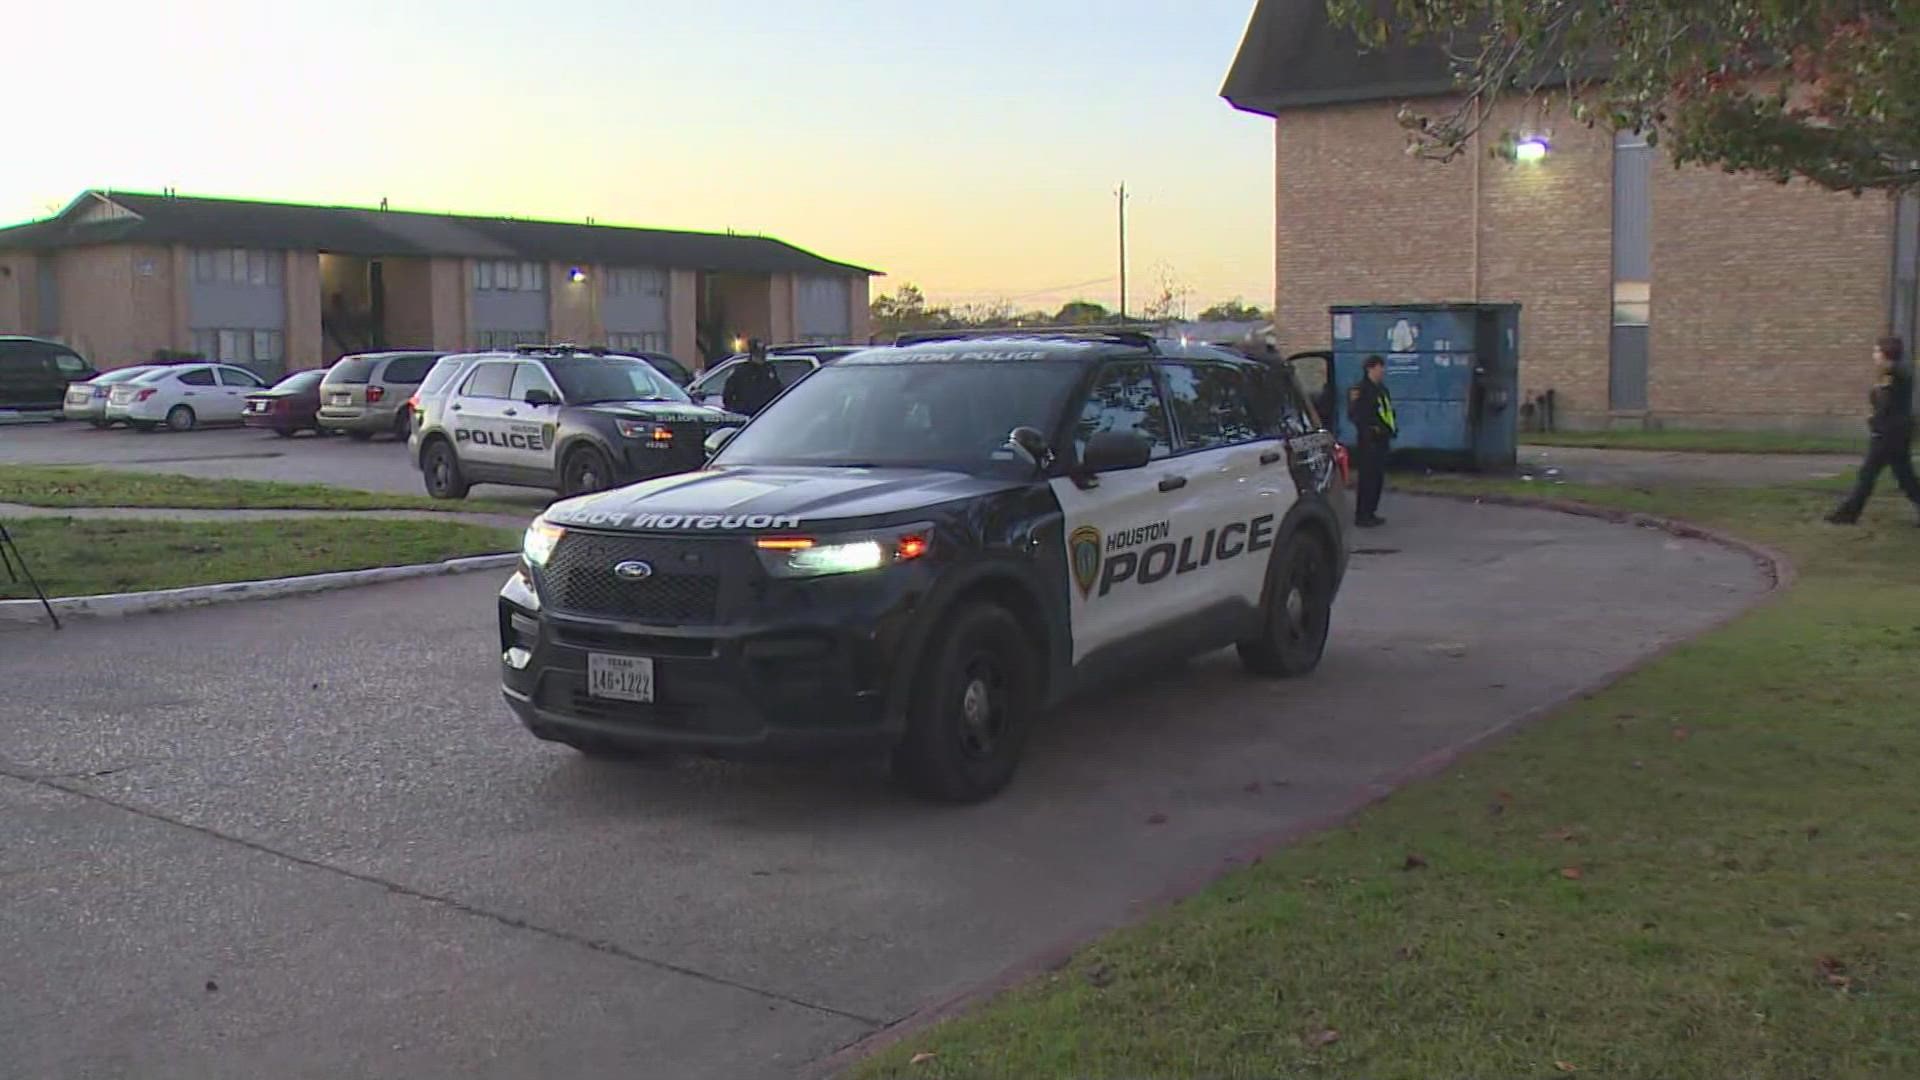 A woman died after she was shot in the back on the south side Thursday morning, according to the Houston Police Department.